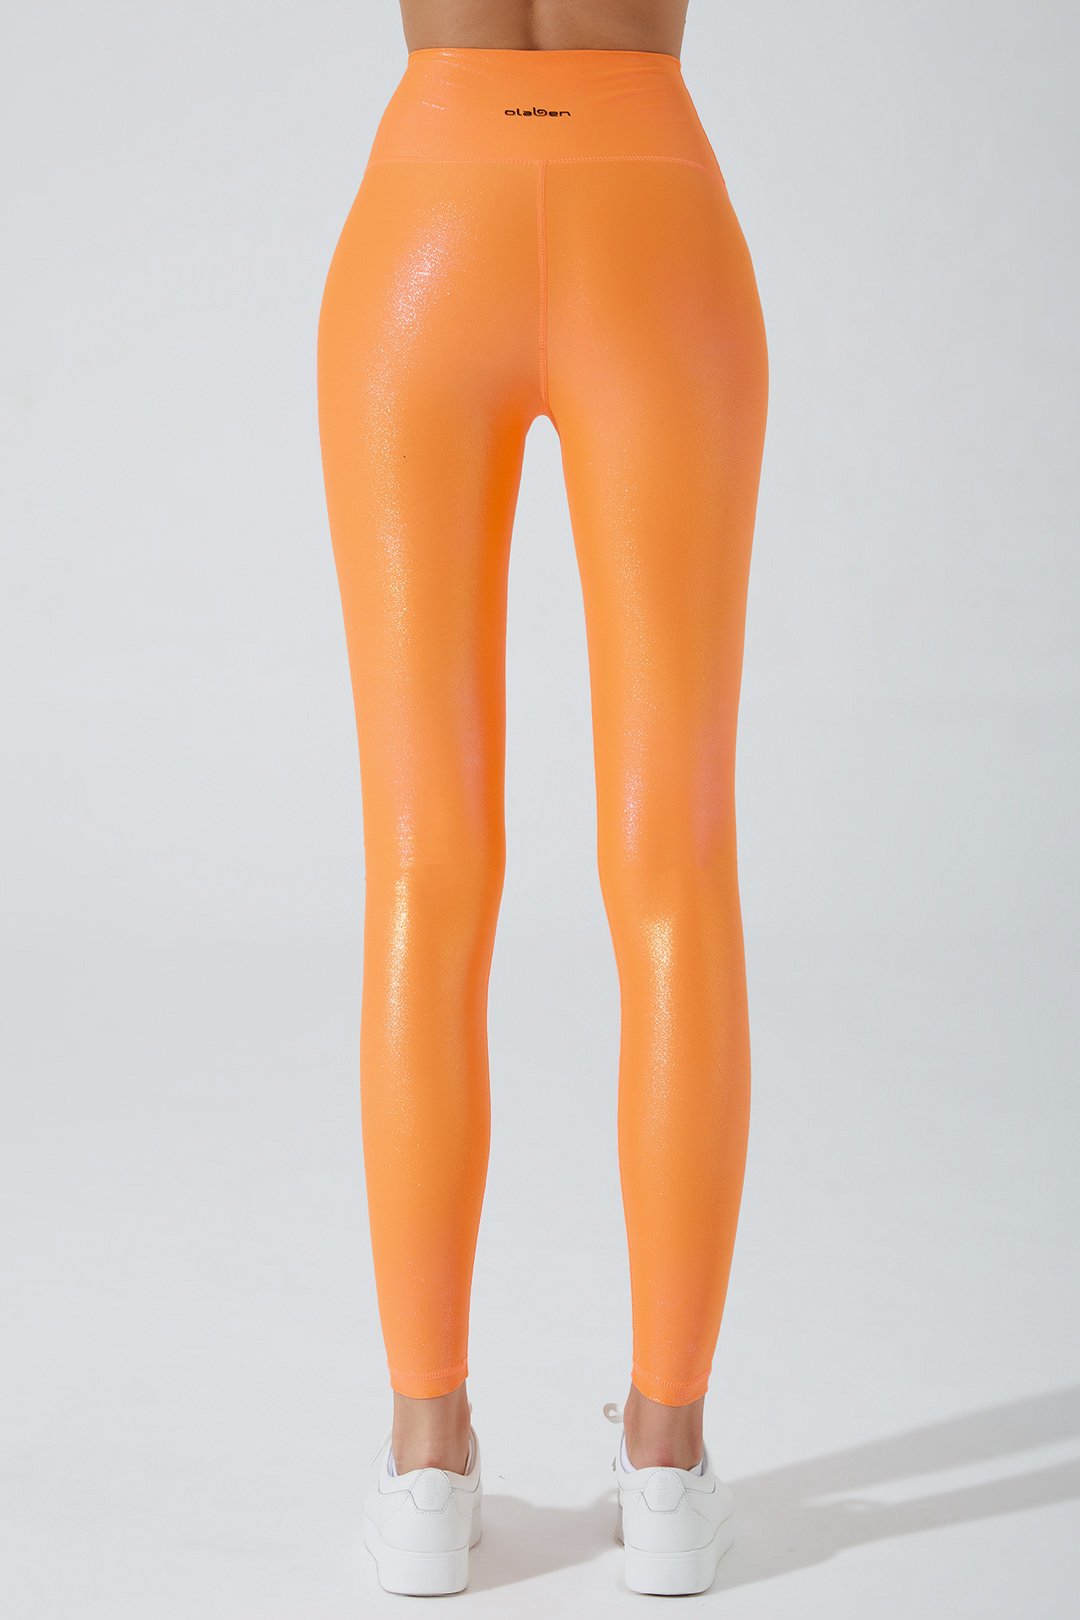 Vibrant jolly orange women's leggings with an iridescent finish - OW-0048-WLG-OR_3.